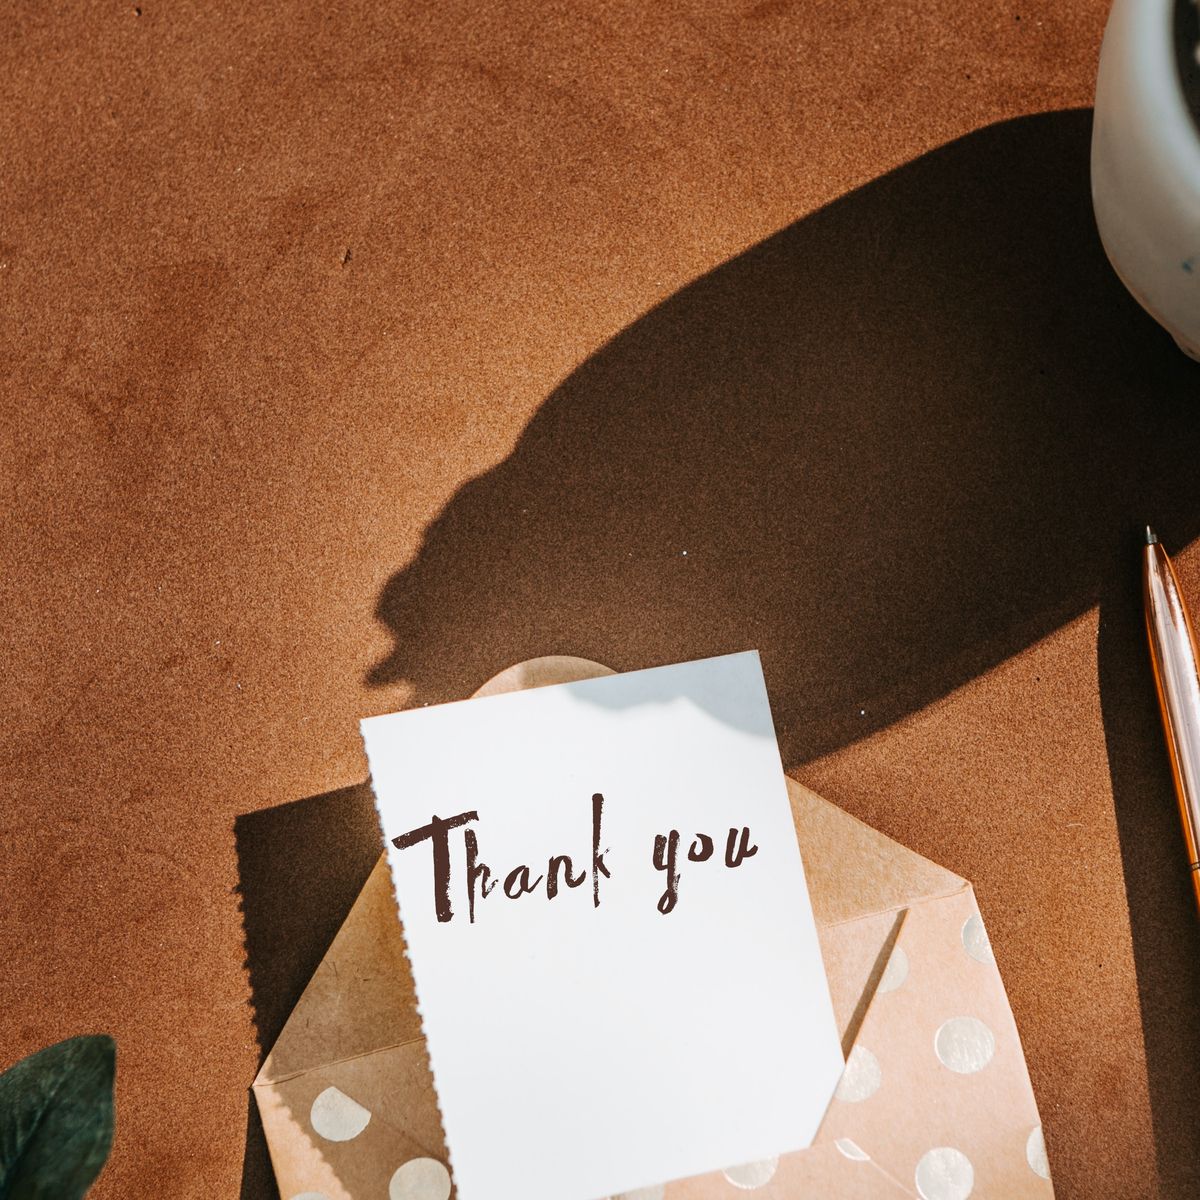 100 Best Thank-You Messages and Quotes for Every Occasion